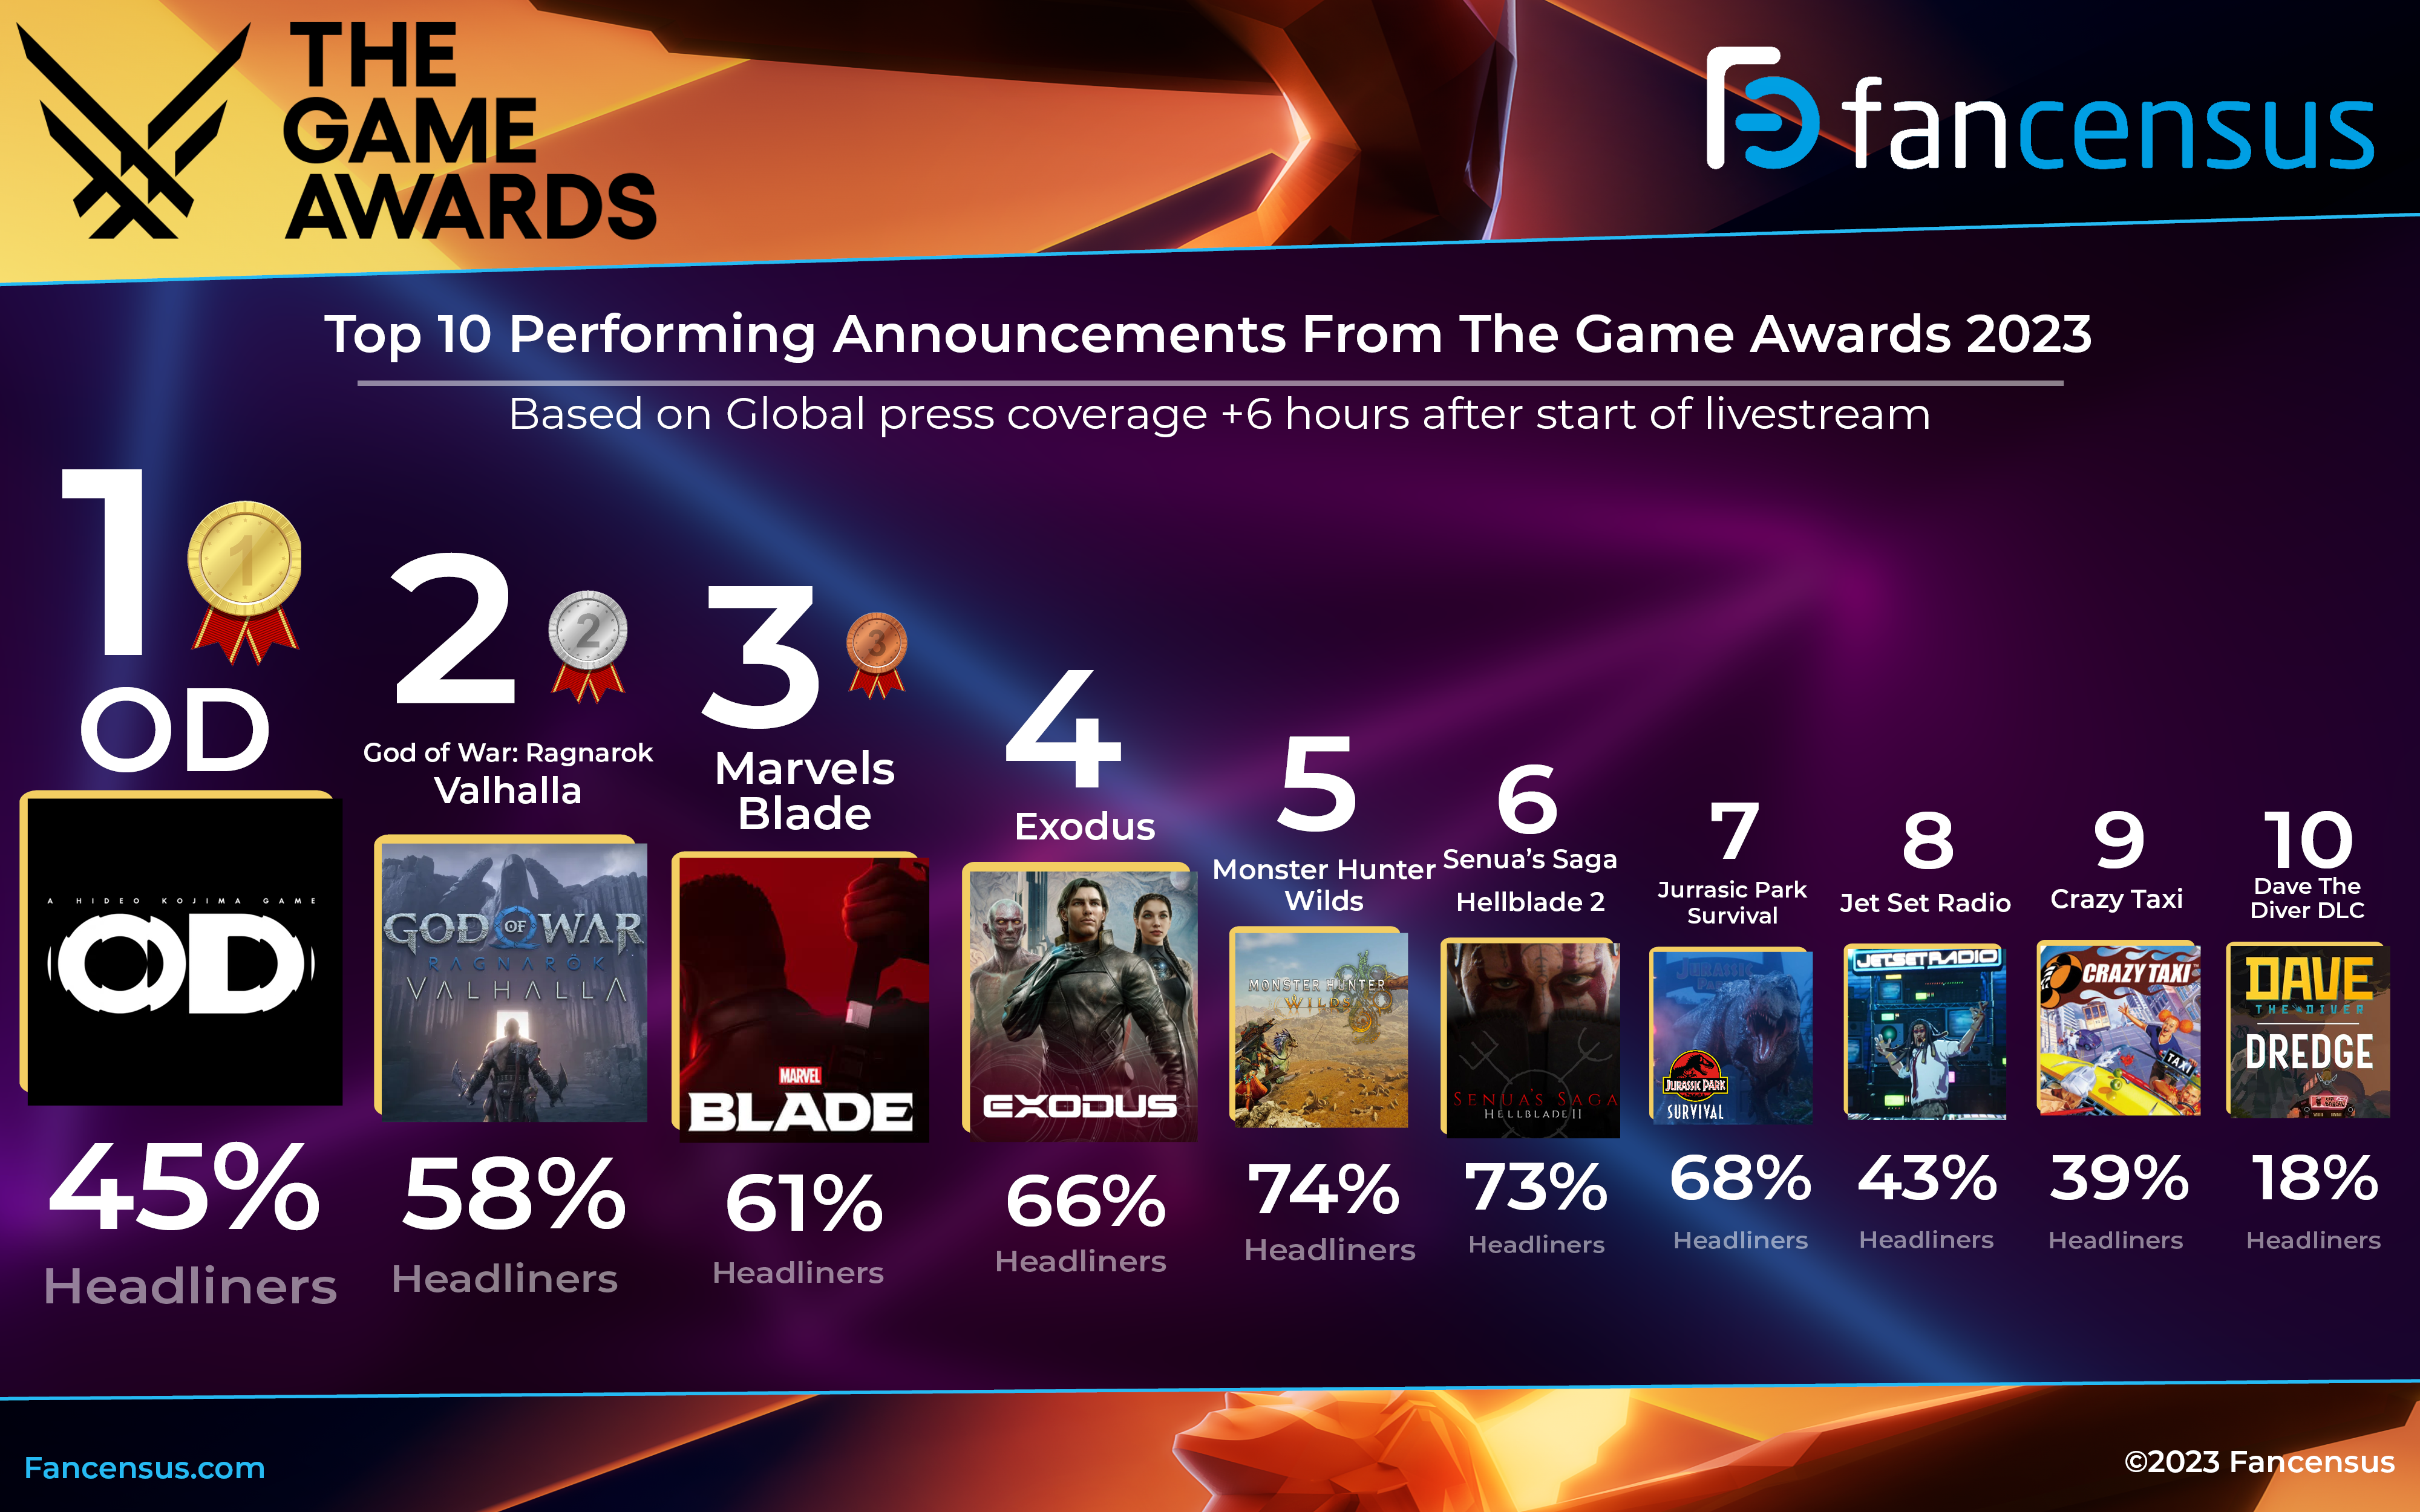 The Game Awards 2021 Nominations Announcement Info